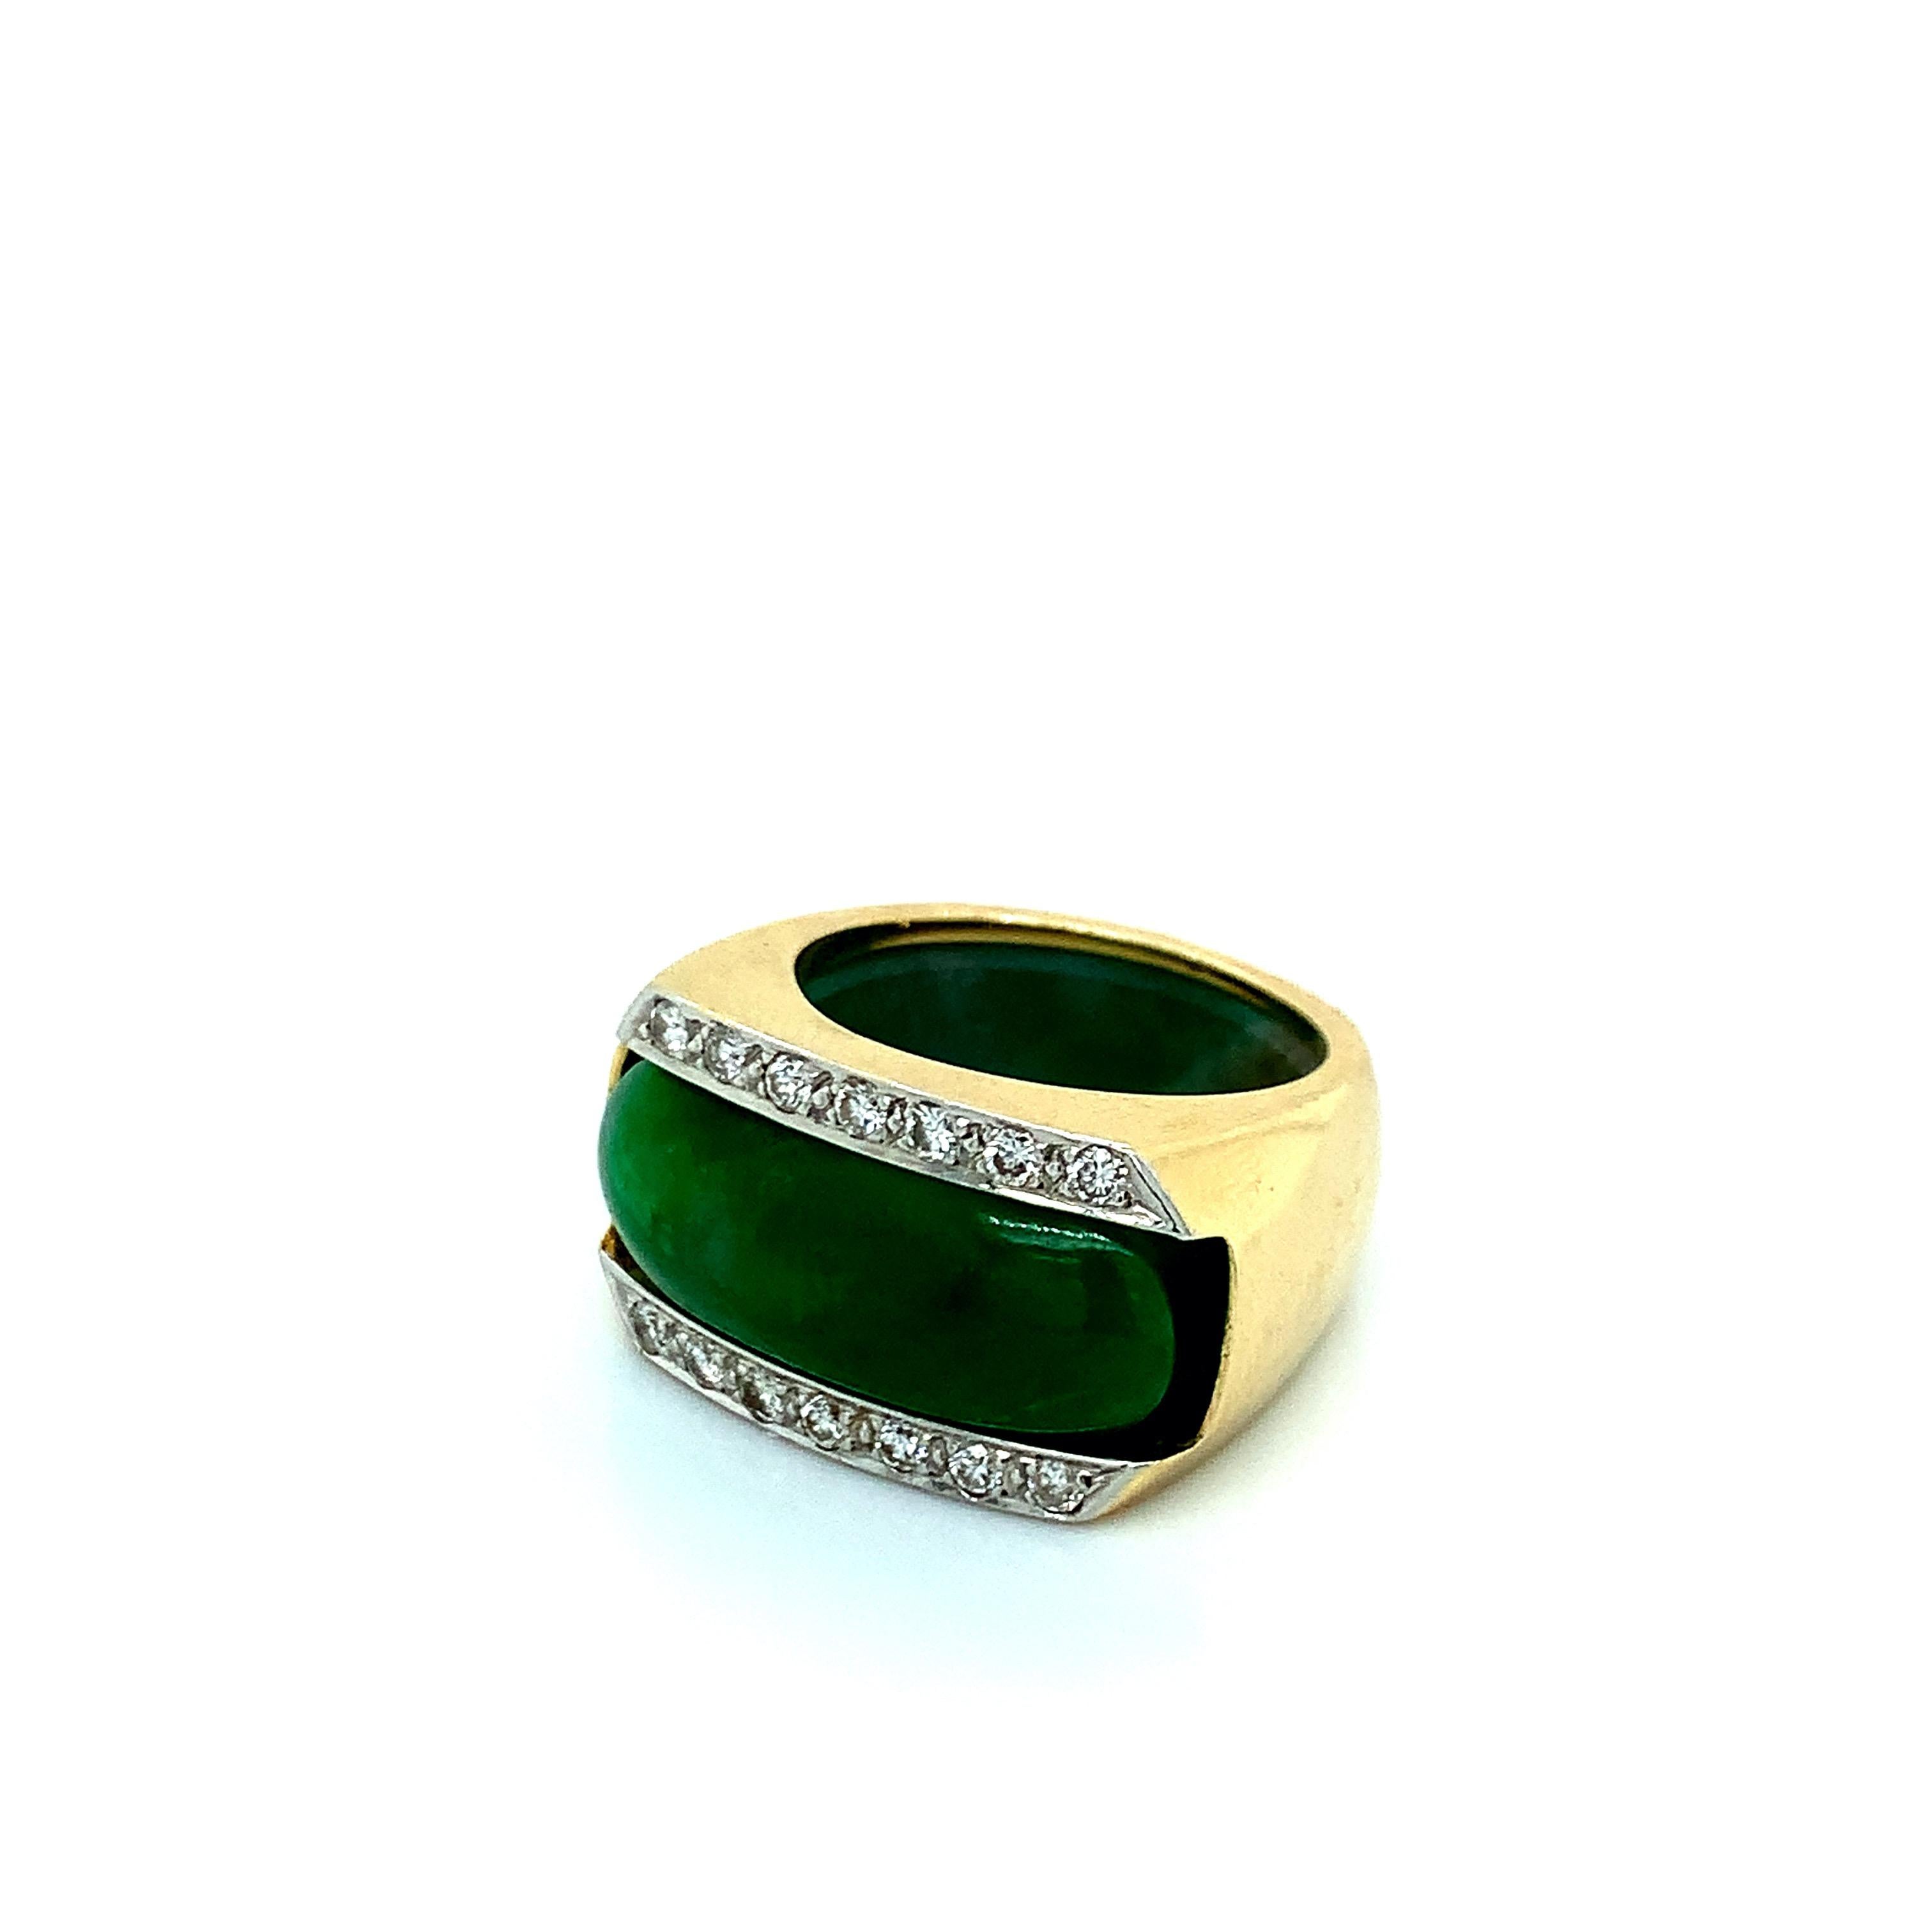 A 14 karat gold insert ring with a natural type A jade ring that fits perfectly inside. Total weight: 15.3 grams. Size 6.5. 